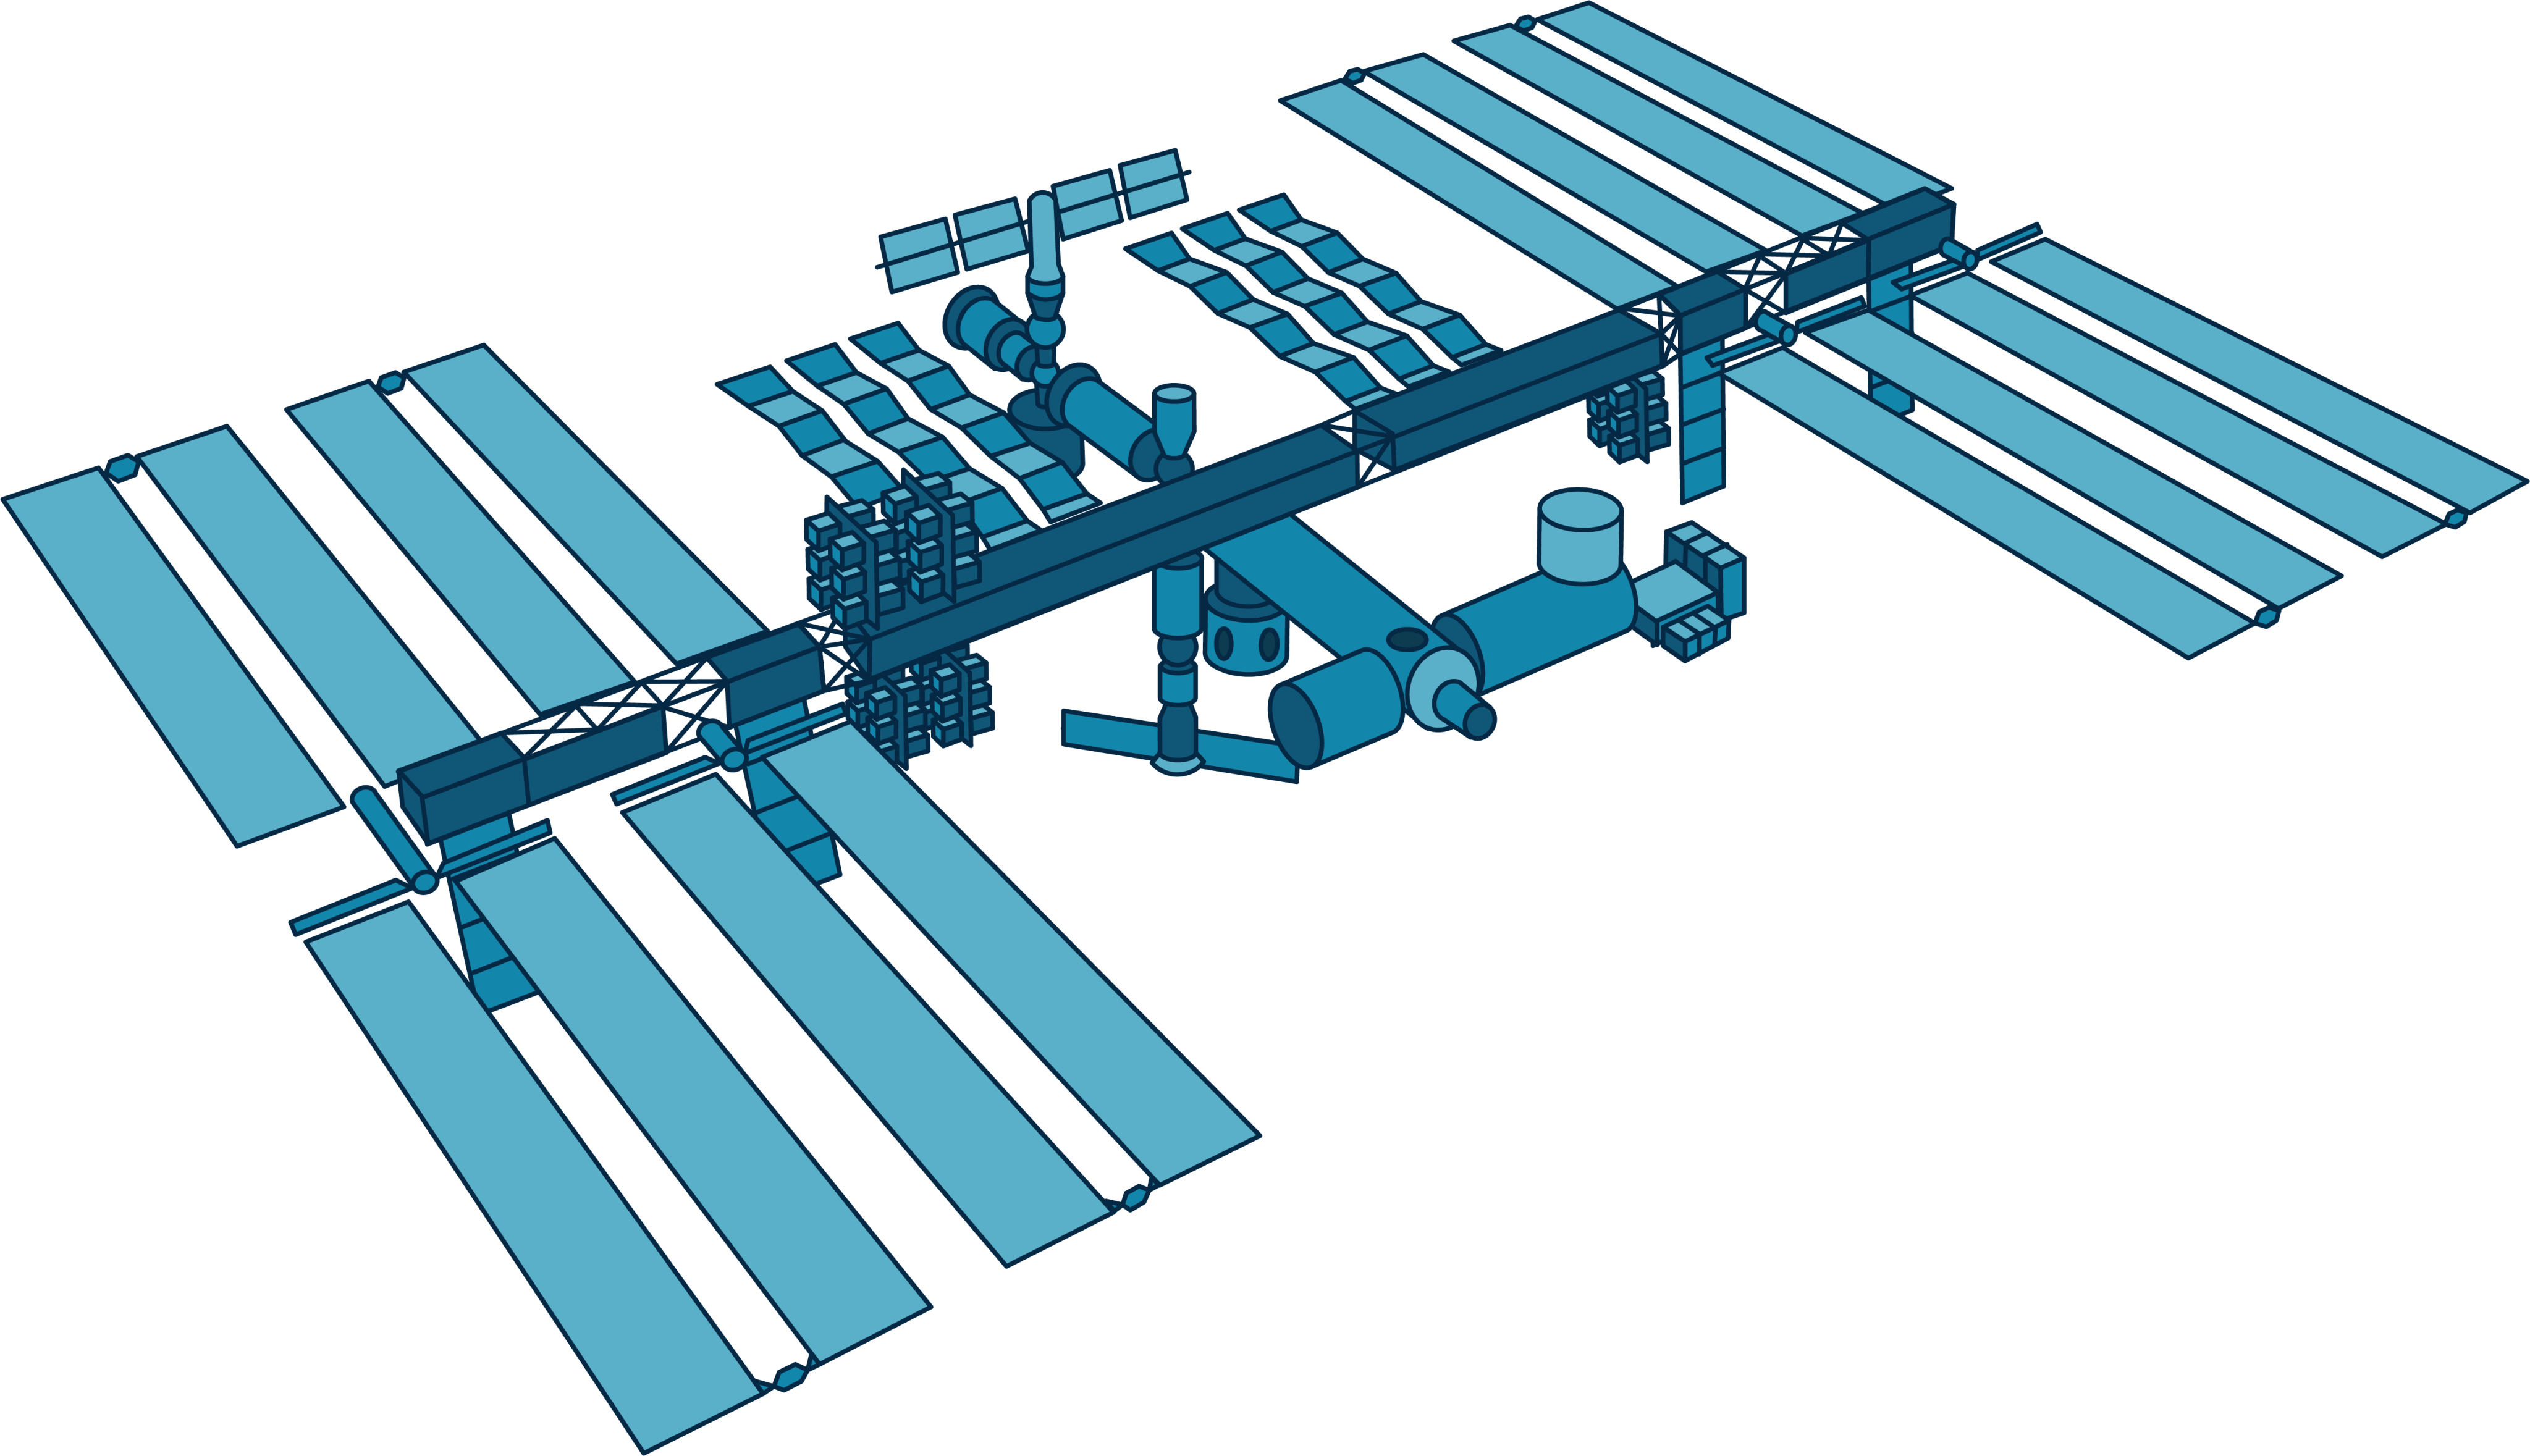 This illustration shows the International Space Station in shades of blue. The space station has a thin middle body made up of different small modules. Extending out from the middle body of the station, each side is flanked by a "wing" made up of a series of long, rectangular solar array pieces.